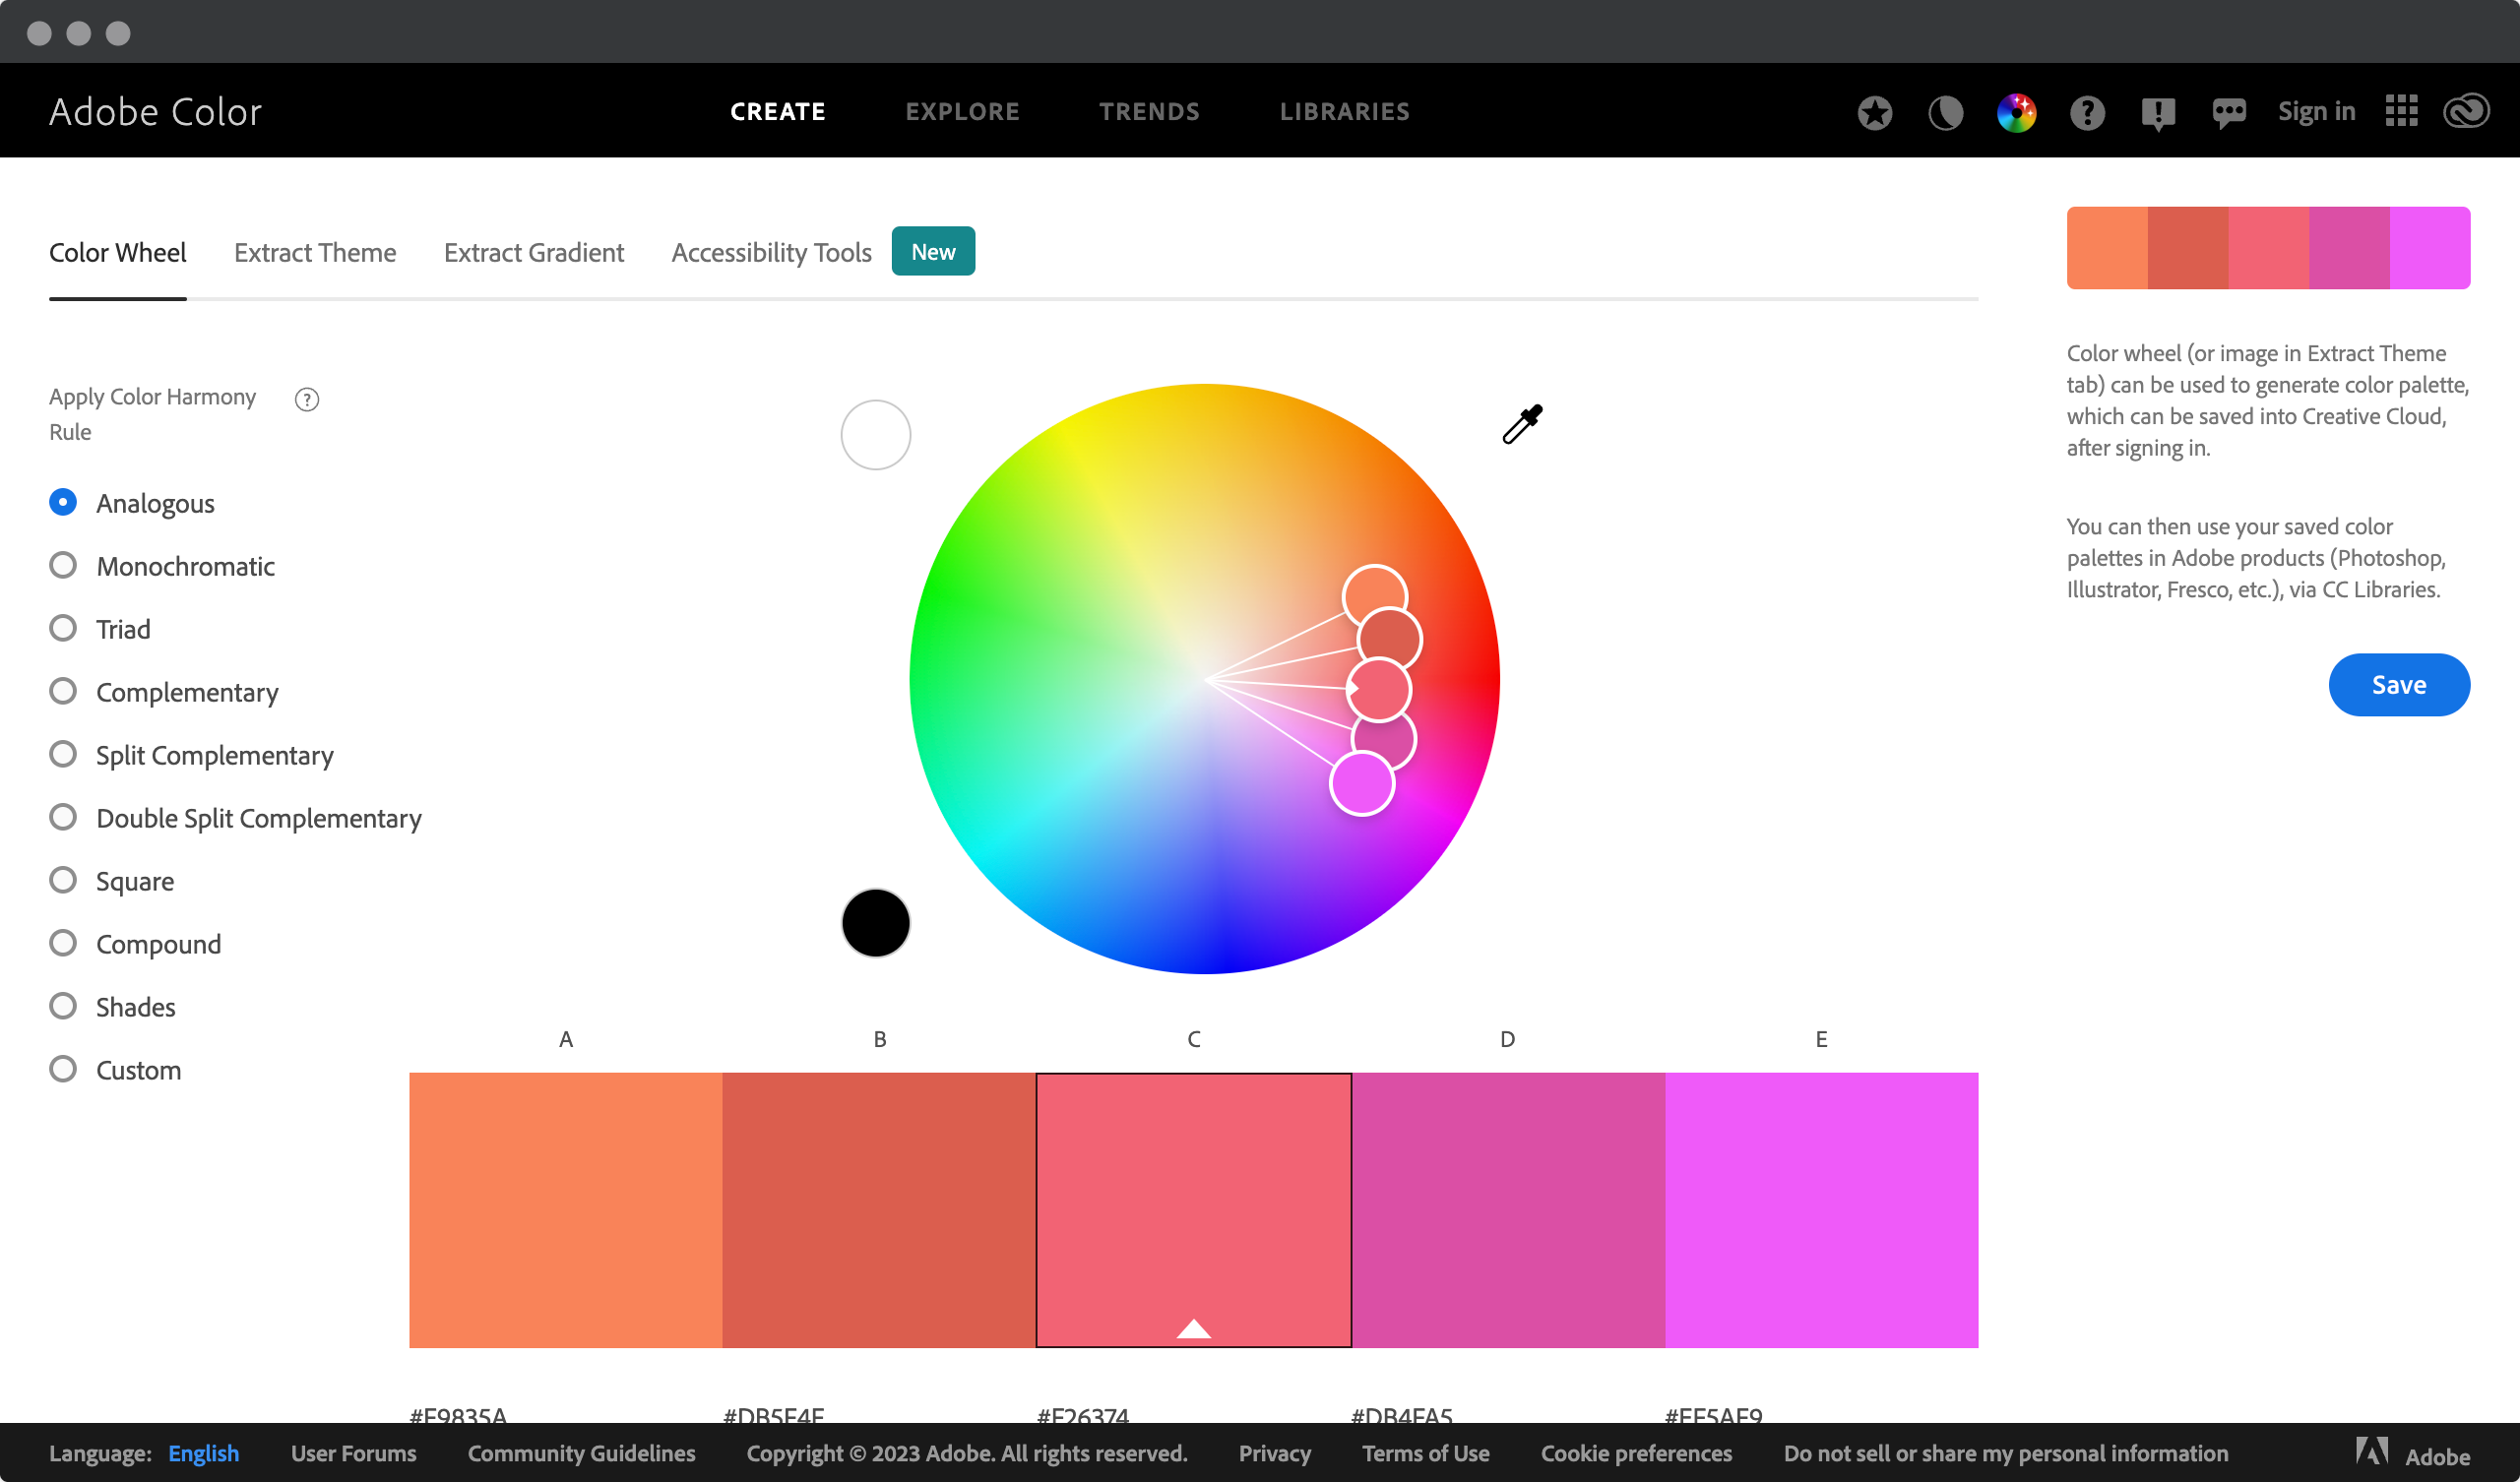 Screenshot of a Web page showing the analogous colors in Adobe Color Wheel tool